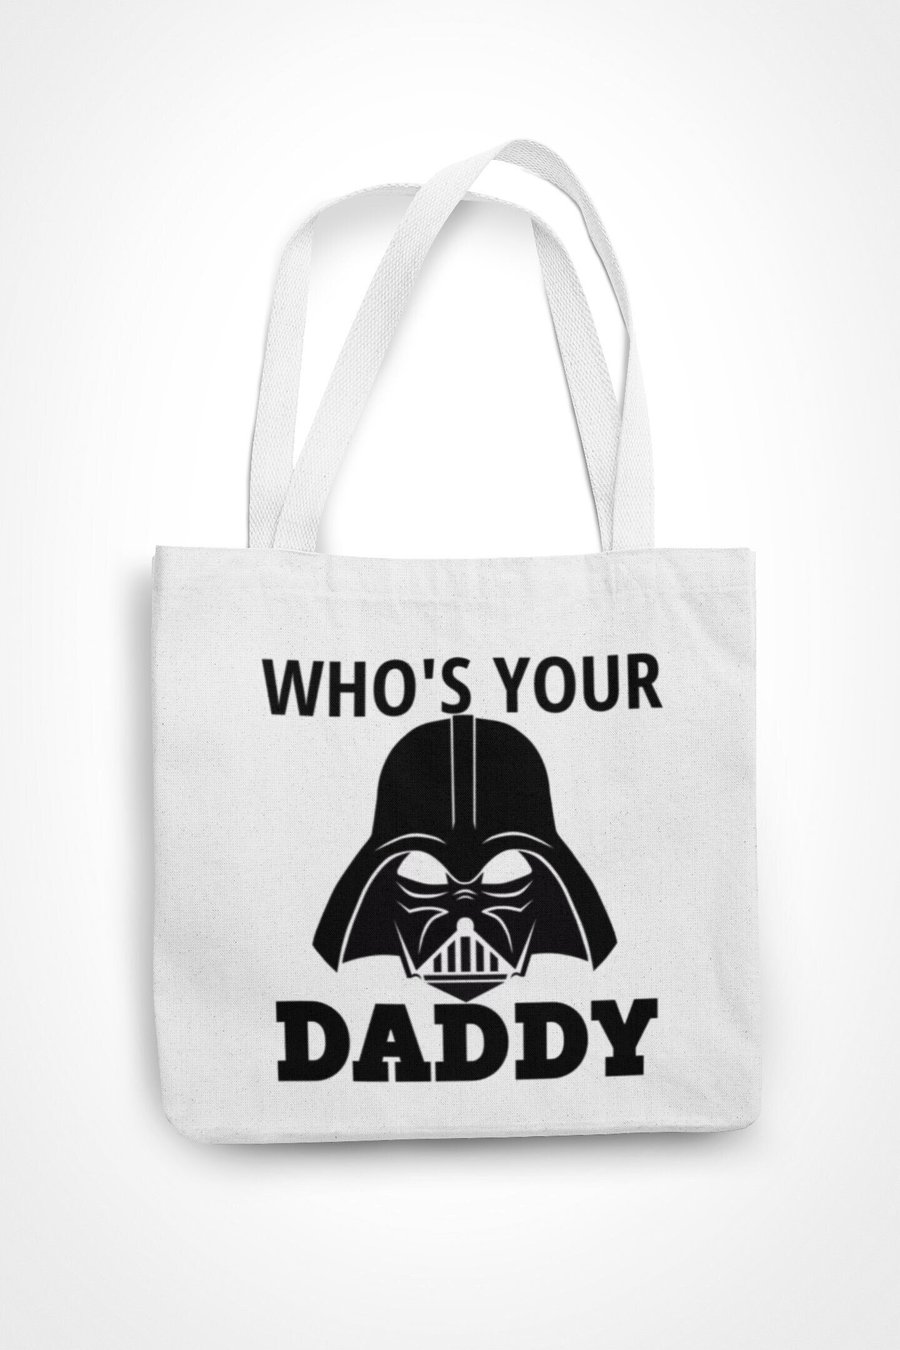 Who's Your Daddy Tote Bag Funny Novelty Star Wars Joke Funny Gift For Friends